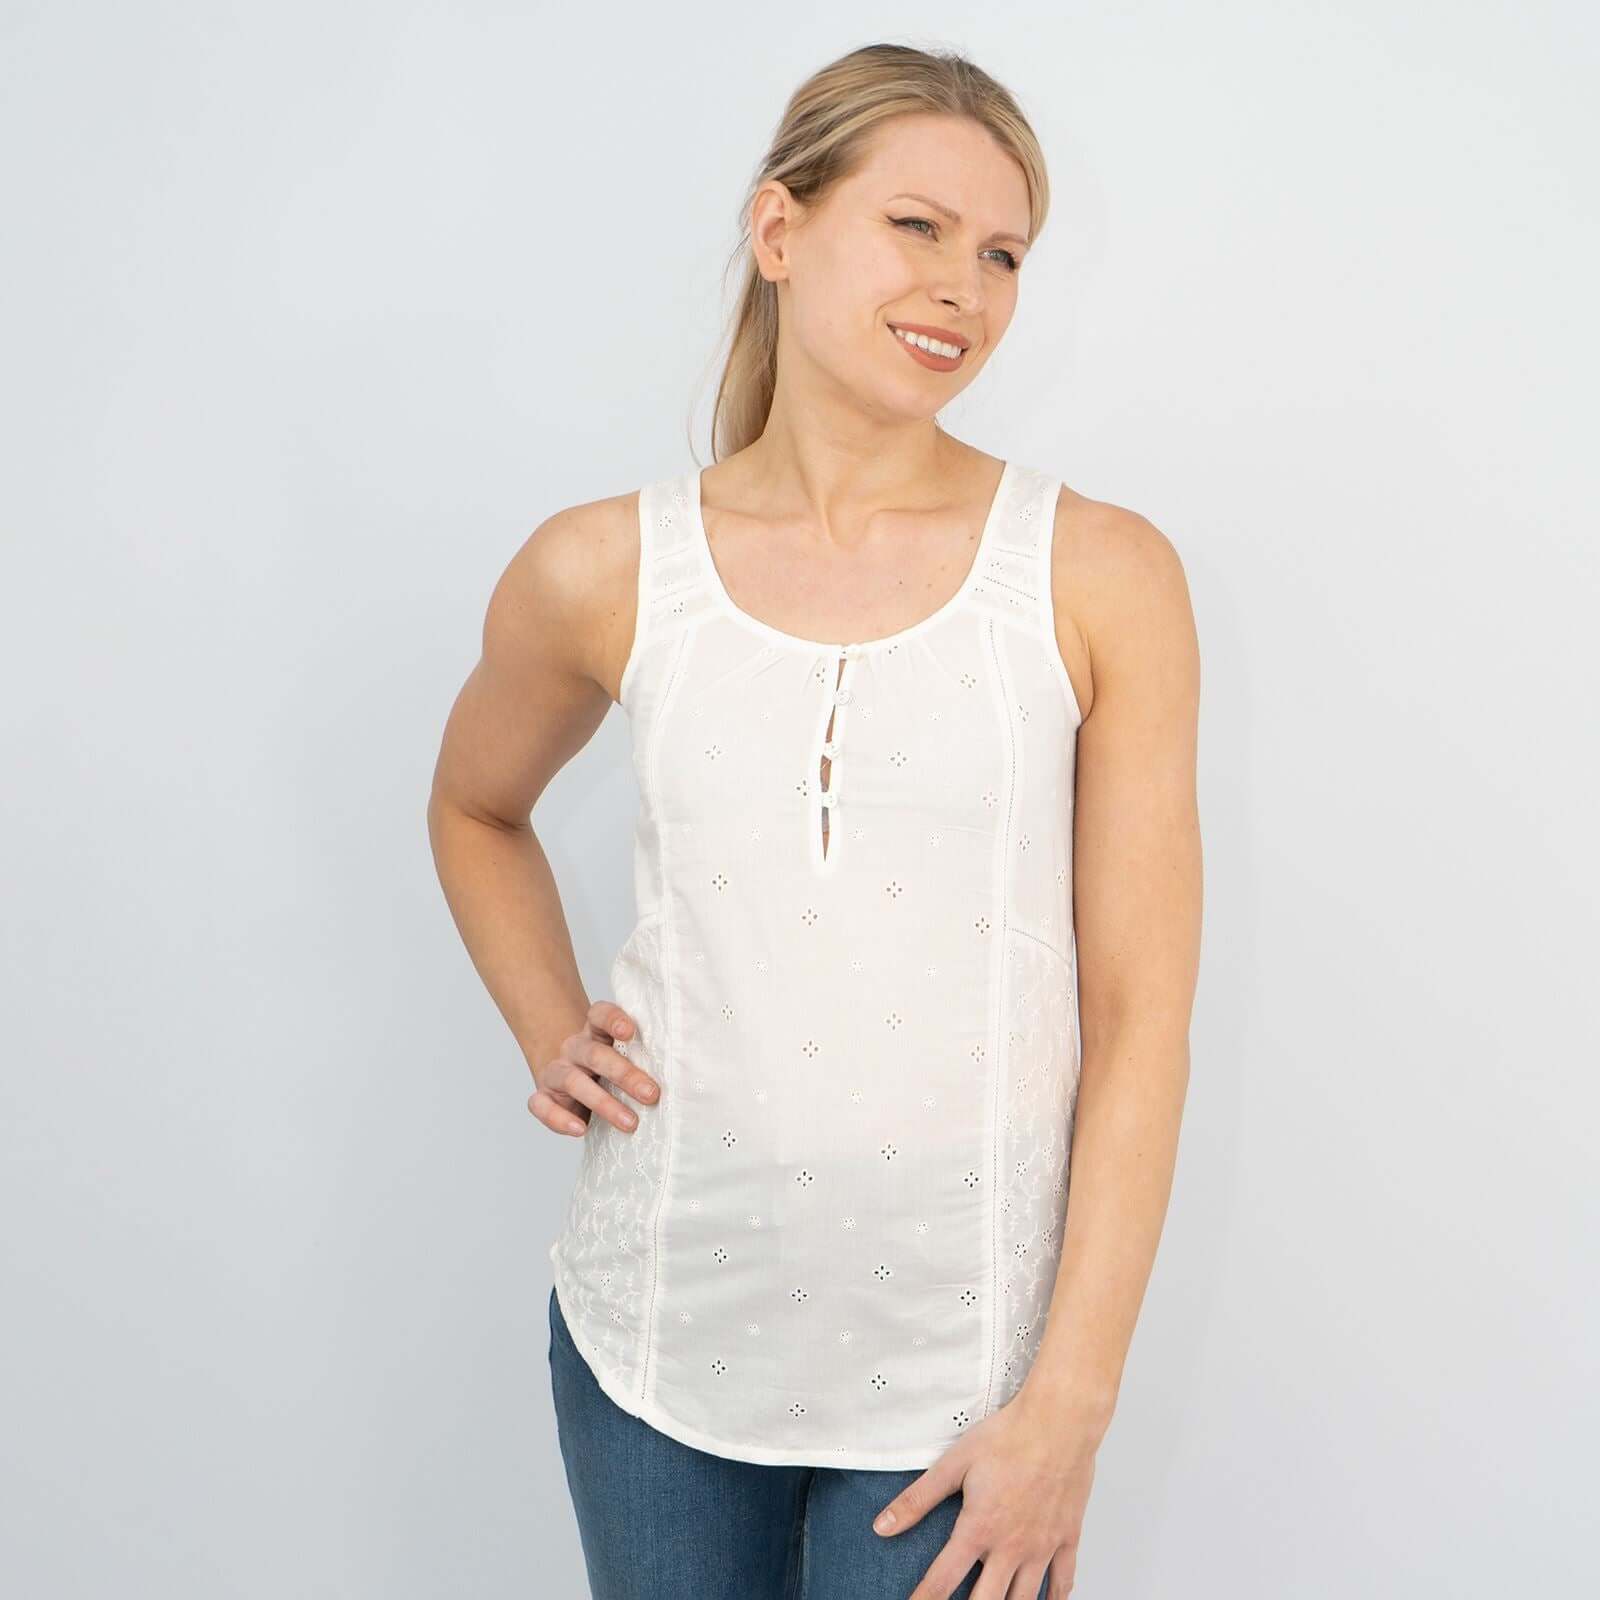 Womens White Sleeveless Lightweight Cotton Vests Floral Embroidery Cami  Tops – Quality Brands Outlet